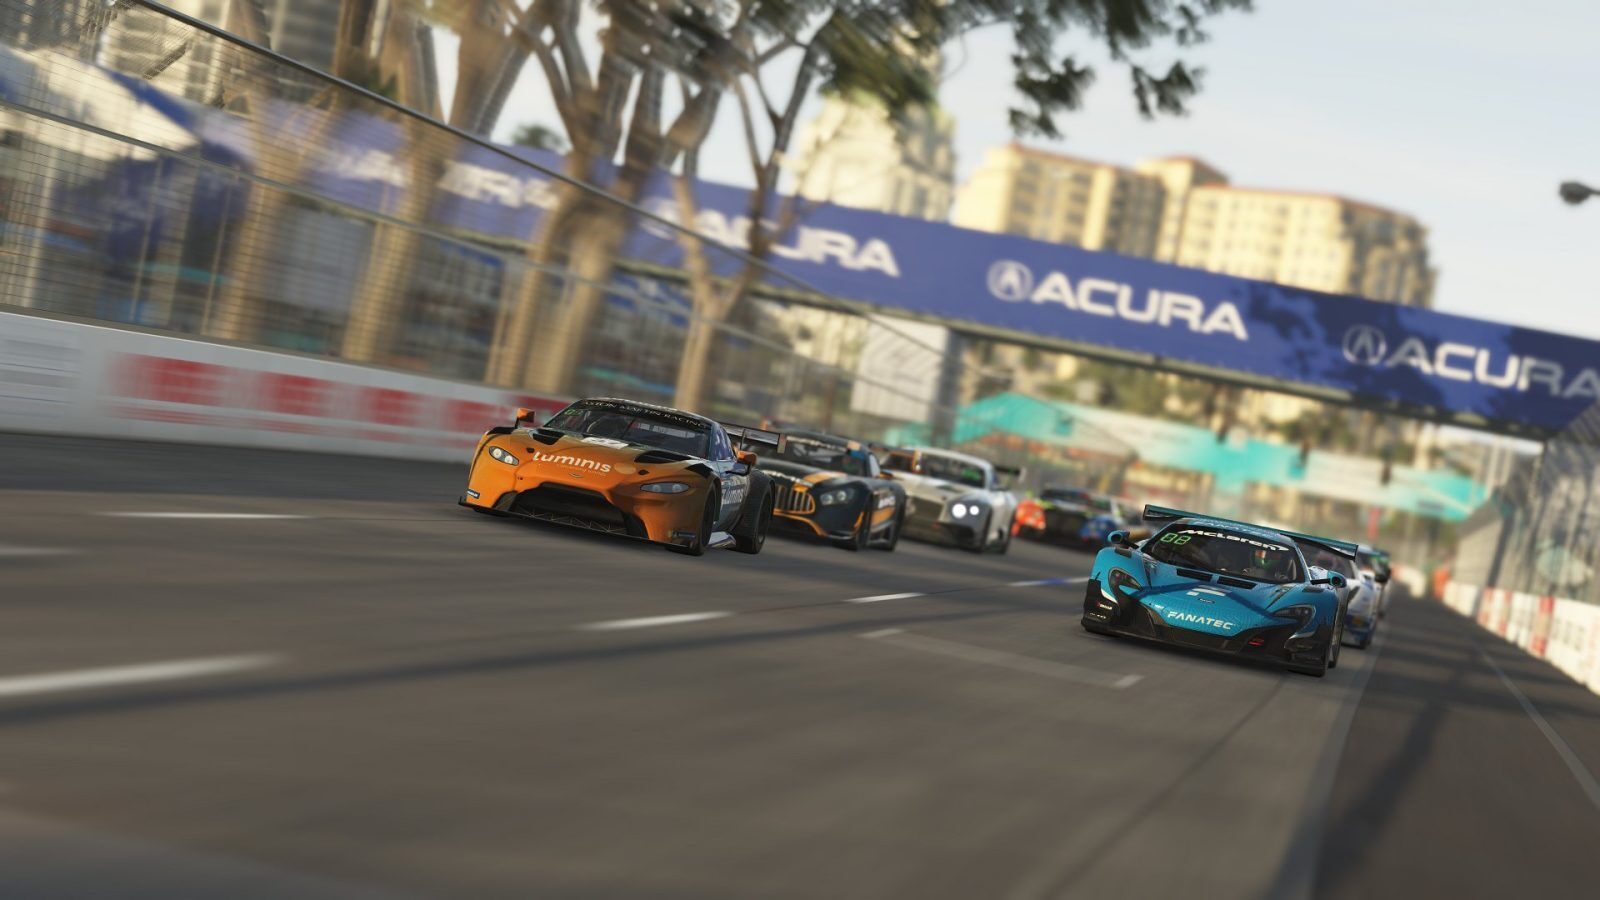 GT3 cars at Long Beach - rFactor 2 Q1 Update adds many new features and content pieces